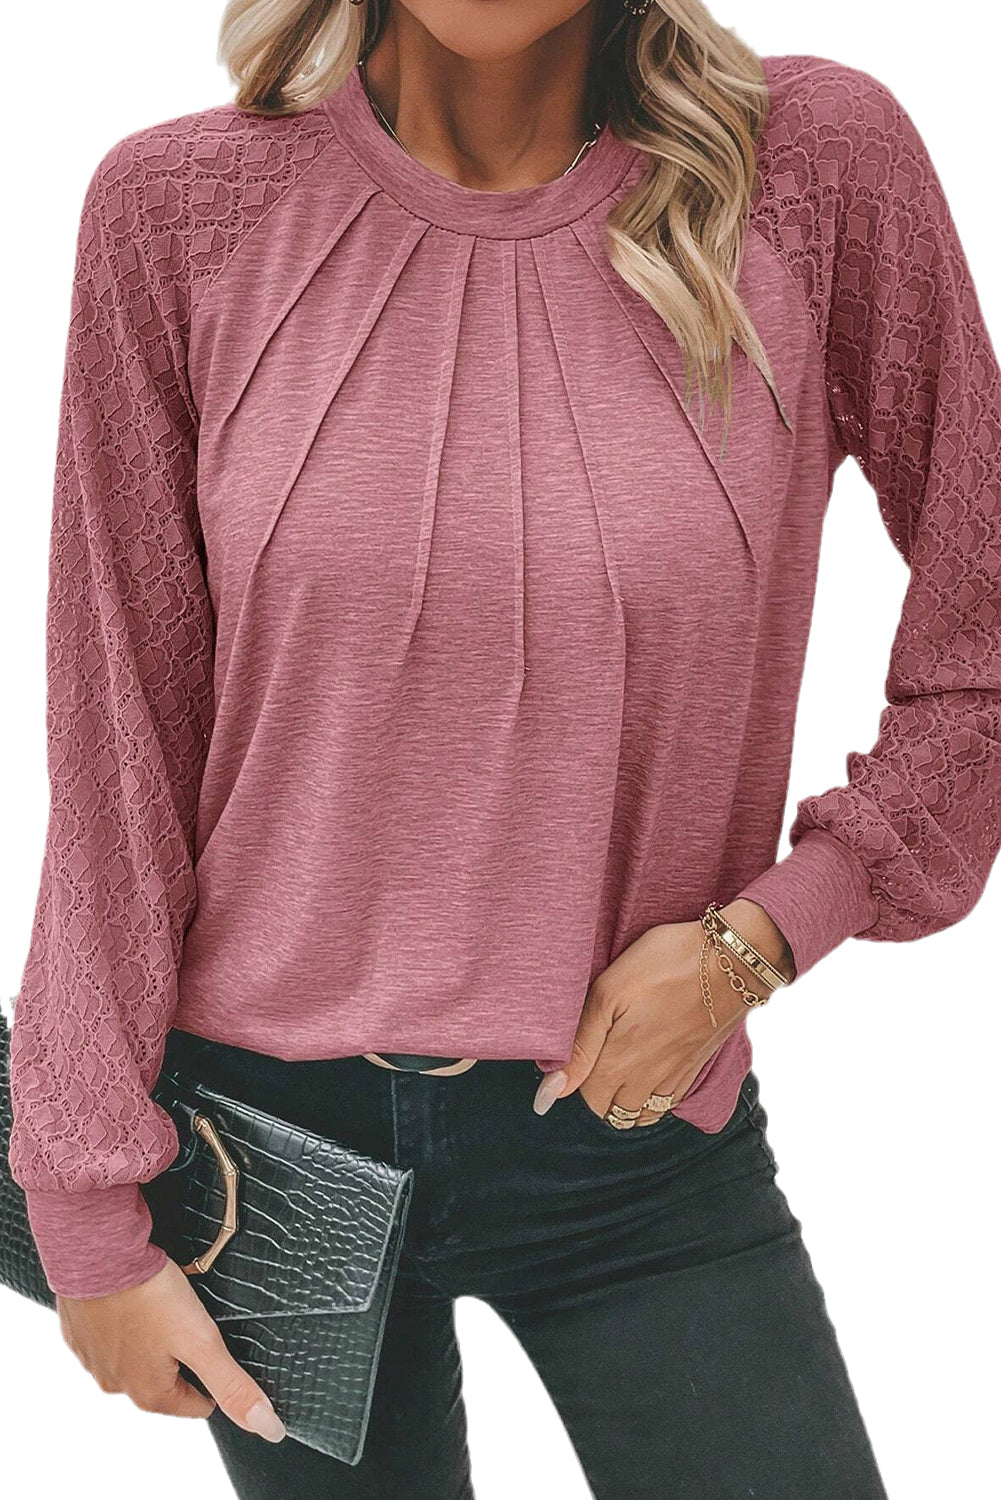 Rose Pink Contrast Lace Raglan Sleeve Plicate Round Neck Top